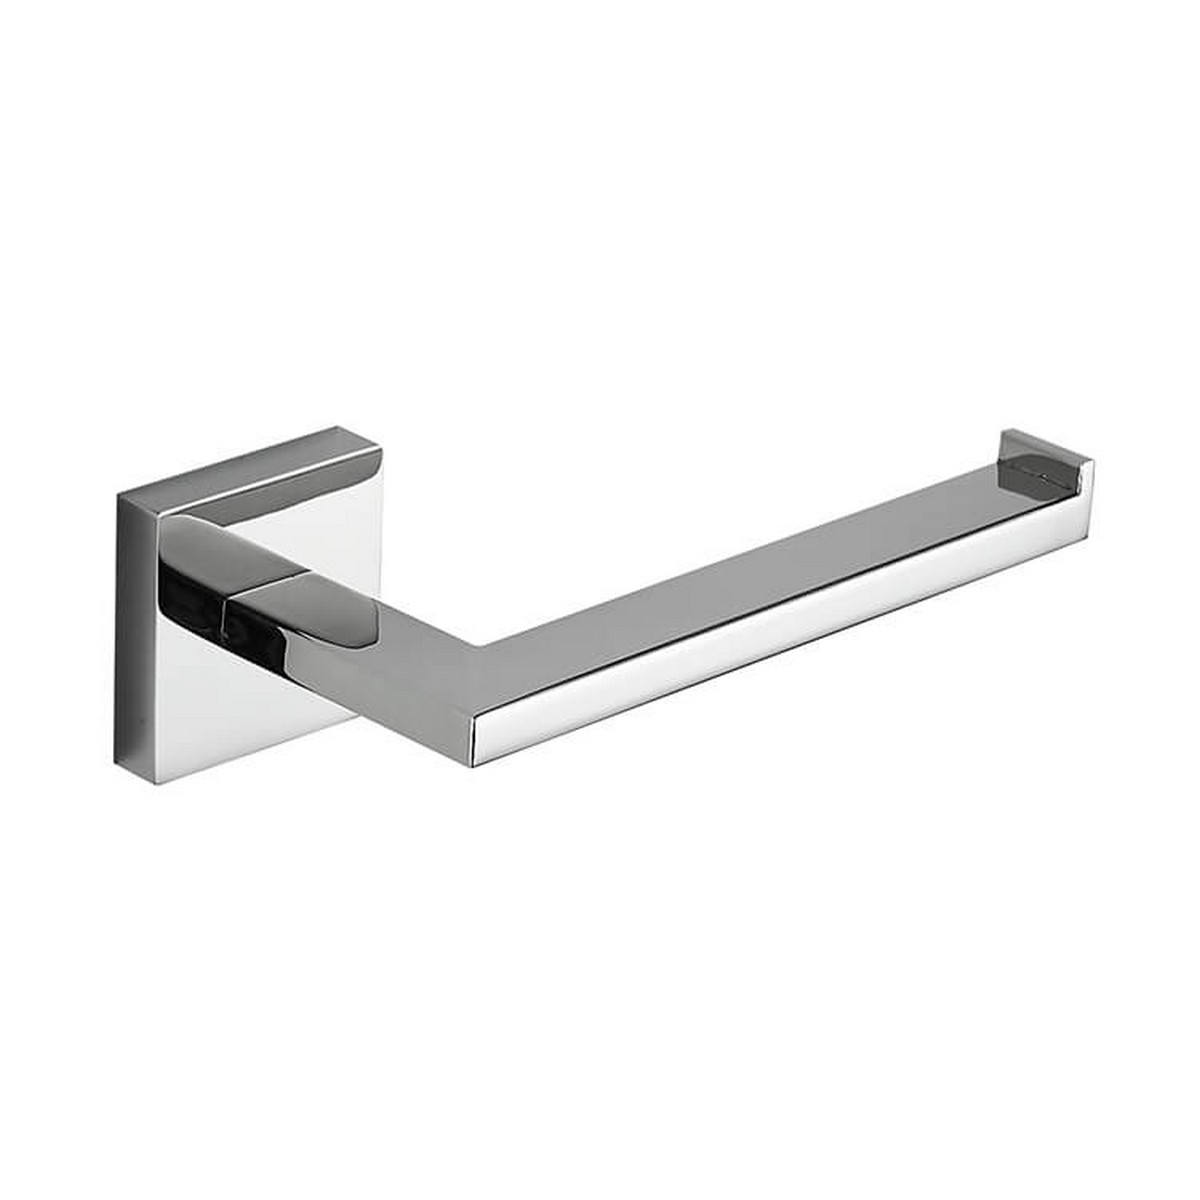 NAMEEKS NCB GENERAL HOTEL 7 INCH STAINLESS STEEL WALL-MOUNTED TOILET PAPER HOLDER